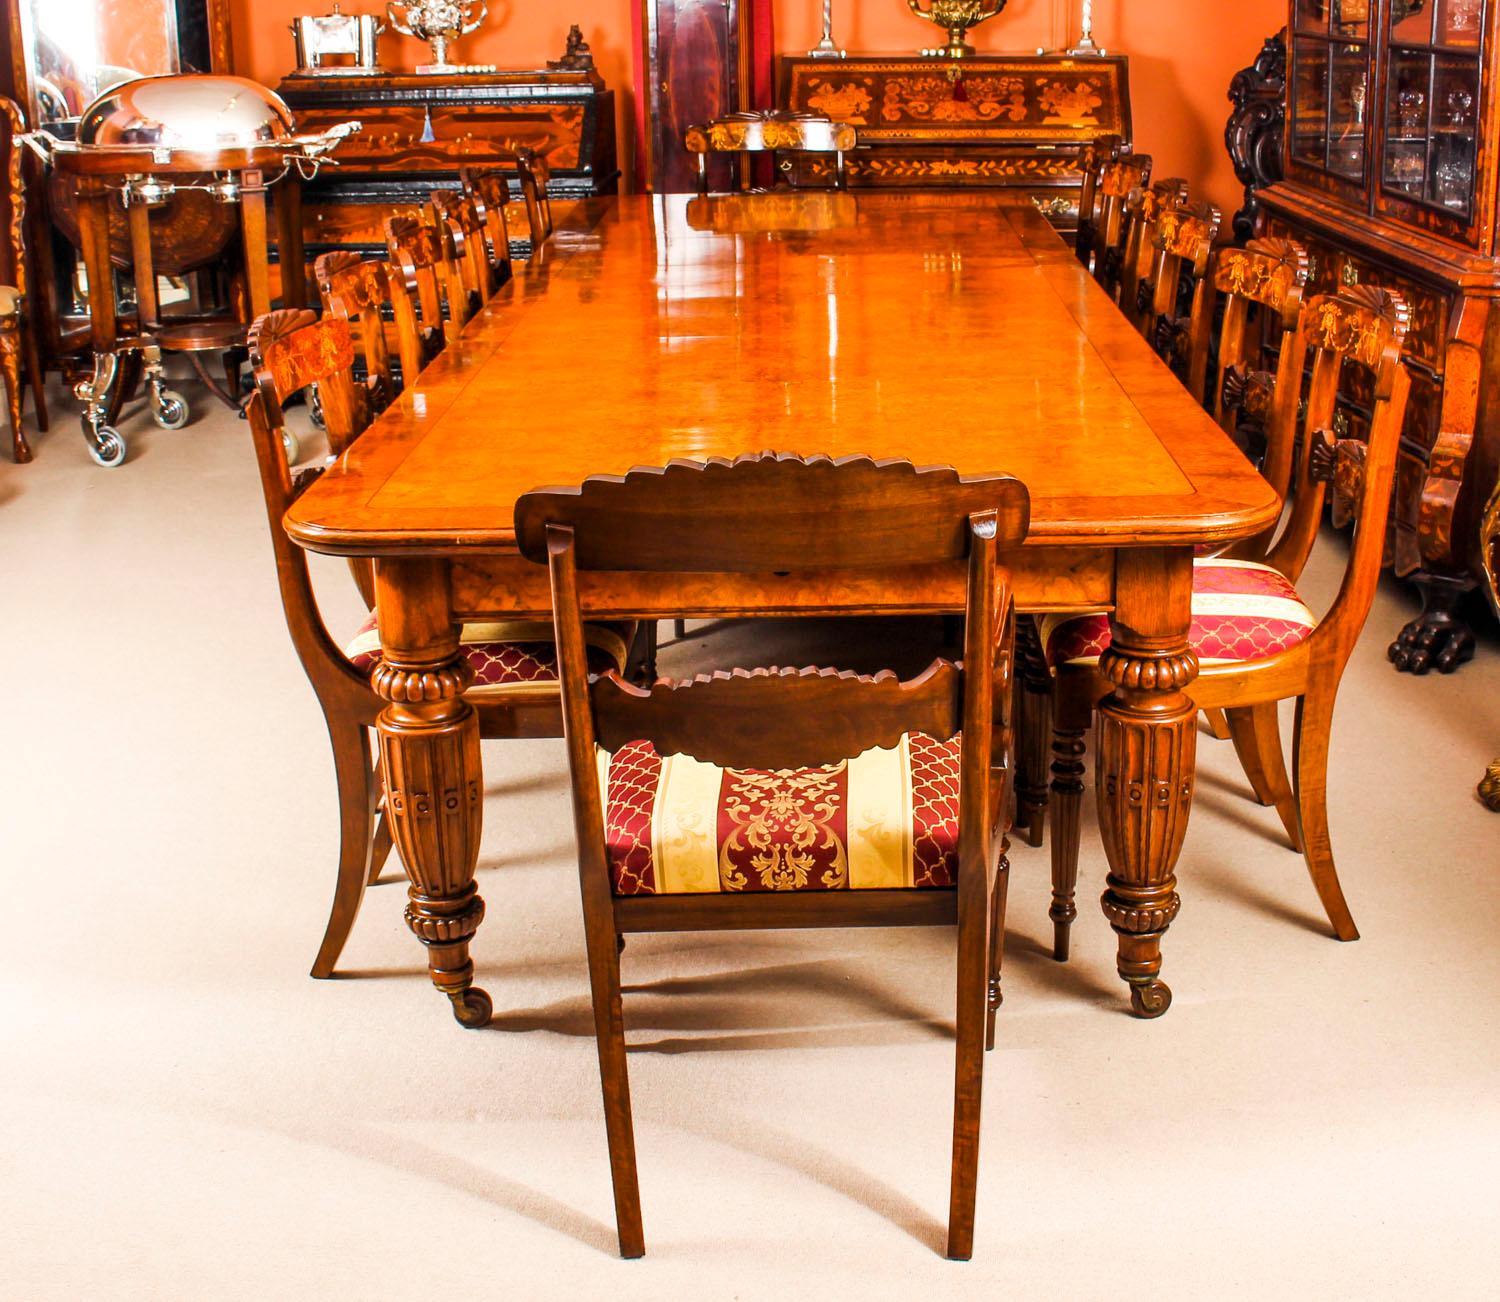 There is no mistaking the style and sophisticated design of this exquisite dining set comprising a rare English antique Victorian pollard oak extending dining table, circa 1860 in date and a set of twelve contemporary inlaid dining chairs. 
The